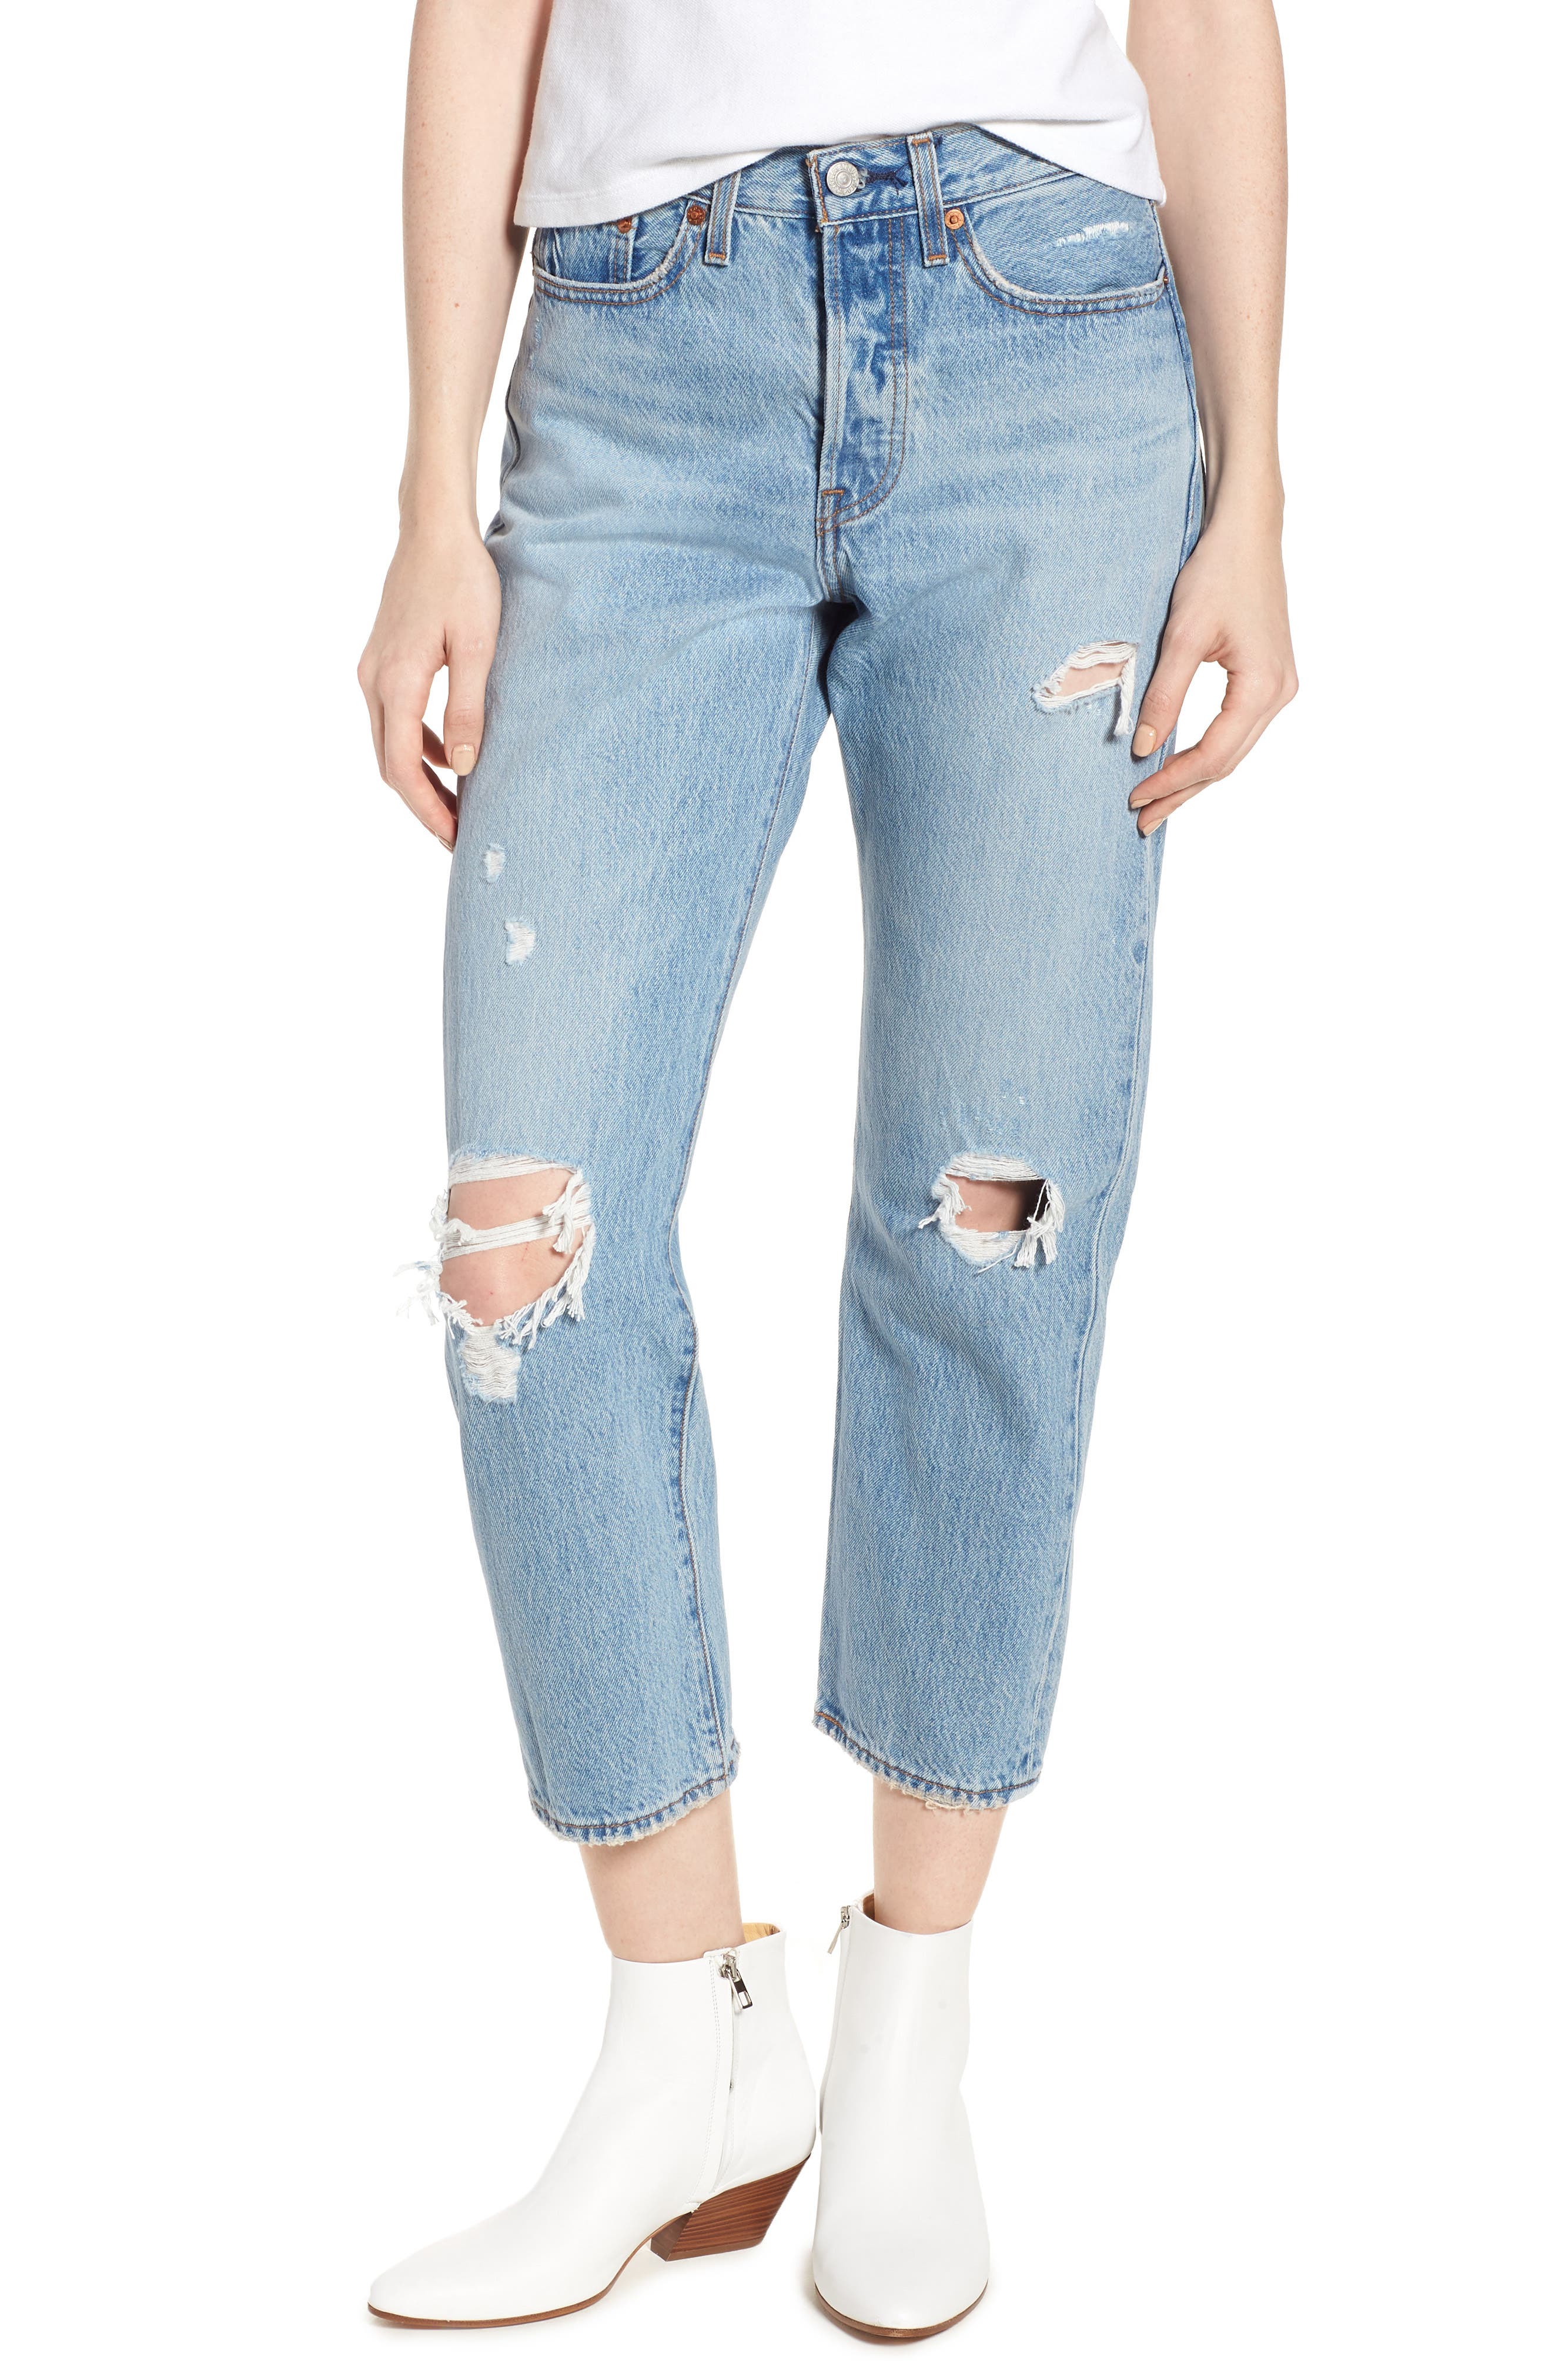 levi's ripped jeans